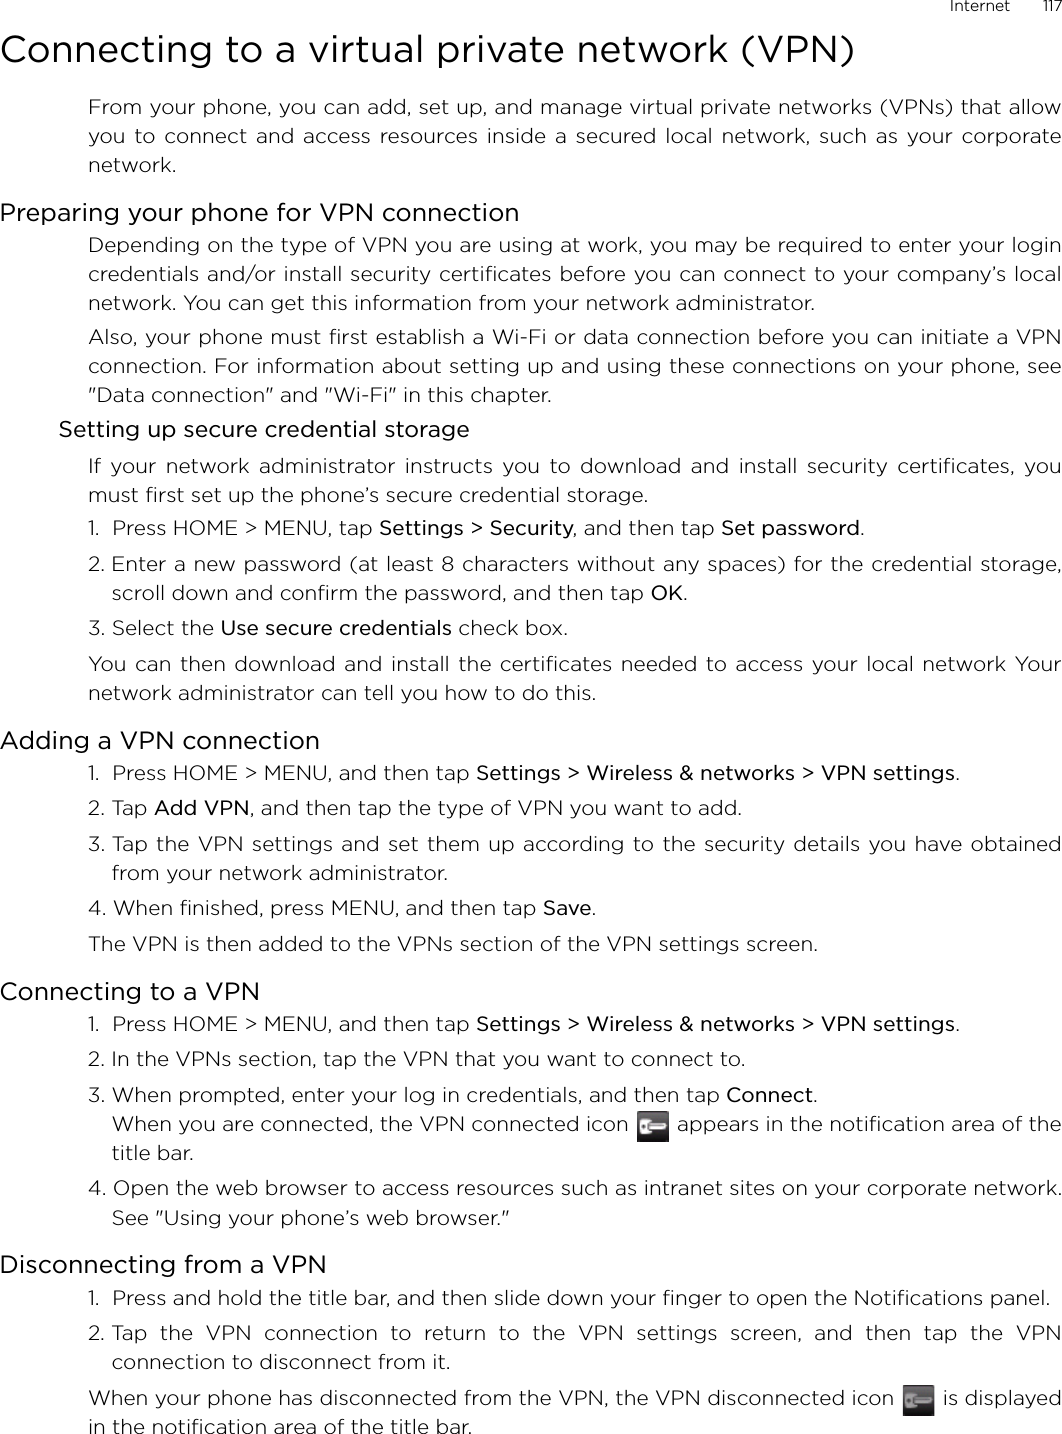 Internet       117Connecting to a virtual private network (VPN)From your phone, you can add, set up, and manage virtual private networks (VPNs) that allowyou to connect and access resources inside a secured local network, such as your corporatenetwork.Preparing your phone for VPN connectionDepending on the type of VPN you are using at work, you may be required to enter your logincredentials and/or install security certificates before you can connect to your company’s localnetwork. You can get this information from your network administrator. Also, your phone must first establish a Wi-Fi or data connection before you can initiate a VPNconnection. For information about setting up and using these connections on your phone, see&quot;Data connection&quot; and &quot;Wi-Fi&quot; in this chapter.Setting up secure credential storageIf your network administrator instructs you to download and install security certificates, youmust first set up the phone’s secure credential storage.1.  Press HOME &gt; MENU, tap Settings &gt; Security, and then tap Set password.2. Enter a new password (at least 8 characters without any spaces) for the credential storage,scroll down and confirm the password, and then tap OK.3. Select the Use secure credentials check box.You can then download and install the certificates needed to access your local network Yournetwork administrator can tell you how to do this.Adding a VPN connection1.  Press HOME &gt; MENU, and then tap Settings &gt; Wireless &amp; networks &gt; VPN settings.2. Tap Add VPN, and then tap the type of VPN you want to add.3. Tap the VPN settings and set them up according to the security details you have obtainedfrom your network administrator.4. When finished, press MENU, and then tap Save.The VPN is then added to the VPNs section of the VPN settings screen.Connecting to a VPN1.  Press HOME &gt; MENU, and then tap Settings &gt; Wireless &amp; networks &gt; VPN settings.2. In the VPNs section, tap the VPN that you want to connect to.3. When prompted, enter your log in credentials, and then tap Connect.When you are connected, the VPN connected icon   appears in the notification area of thetitle bar.4. Open the web browser to access resources such as intranet sites on your corporate network.See &quot;Using your phone’s web browser.&quot; Disconnecting from a VPN1.  Press and hold the title bar, and then slide down your finger to open the Notifications panel.2. Tap the VPN connection to return to the VPN settings screen, and then tap the VPNconnection to disconnect from it. When your phone has disconnected from the VPN, the VPN disconnected icon   is displayedin the notification area of the title bar.